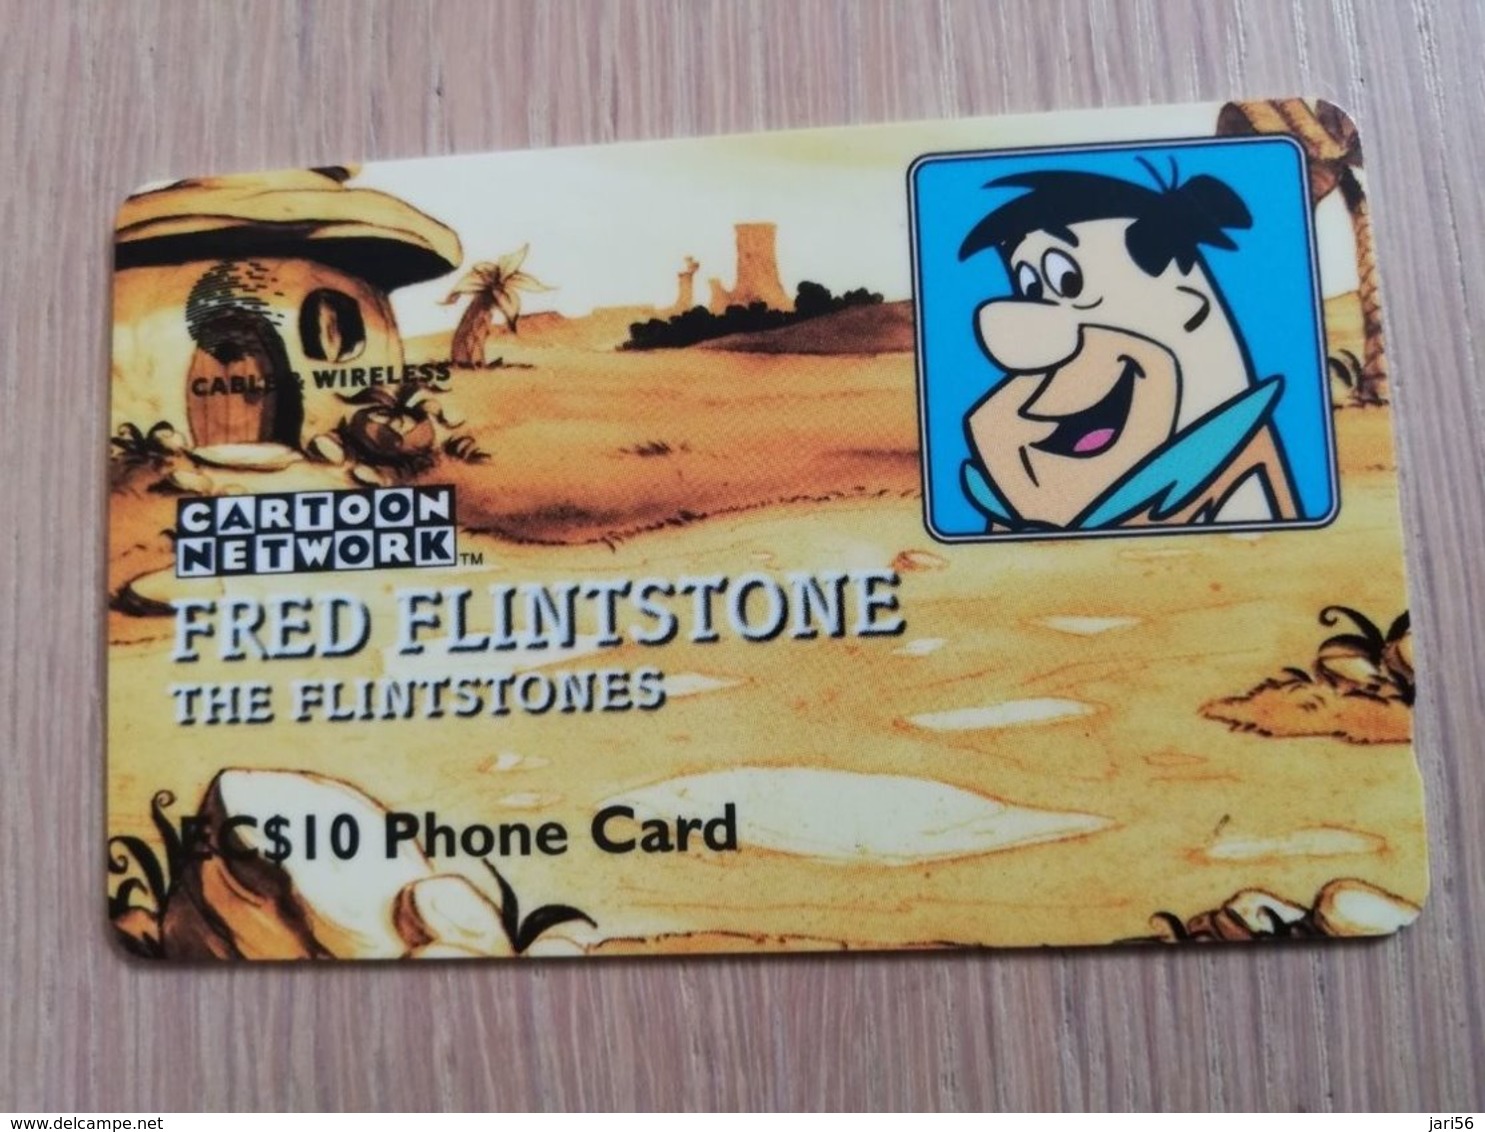 ST LUCIA    $ 10   CABLE & WIRELESS  STL-277D  277CSLD   FRED FLINSTONE     Fine Used Card ** 2452** - Saint Lucia